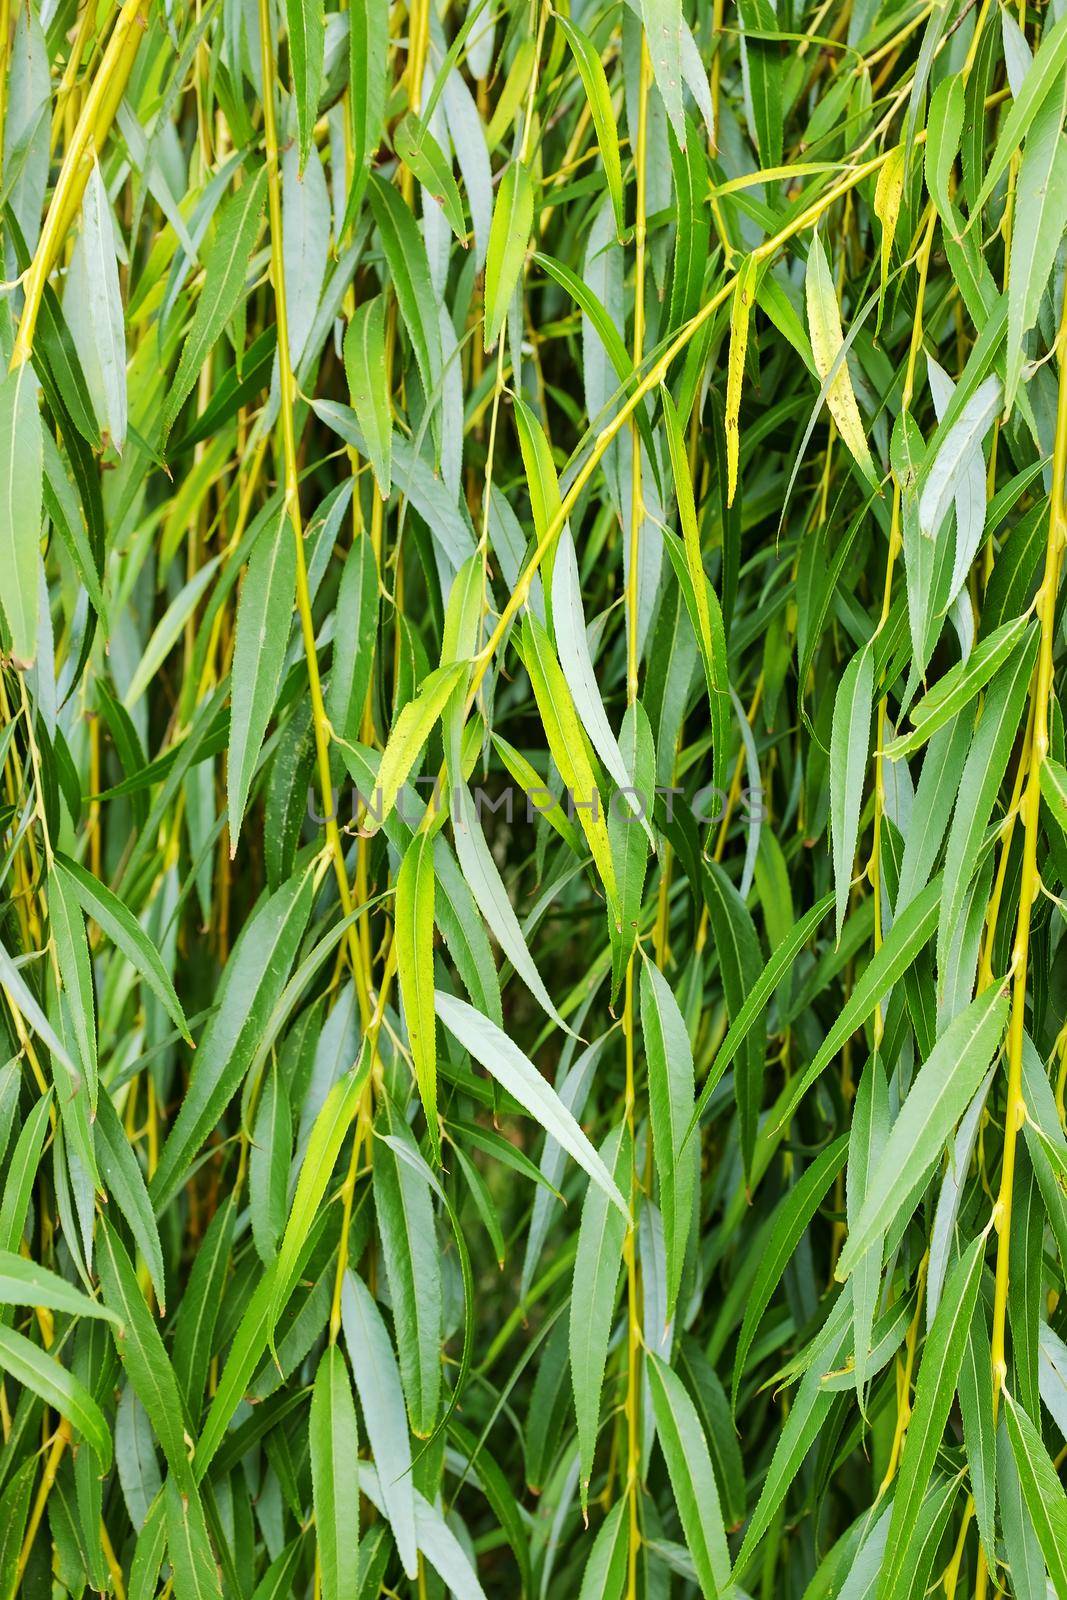 Weeping willow background, weeping willow foliage. Green foliage background.